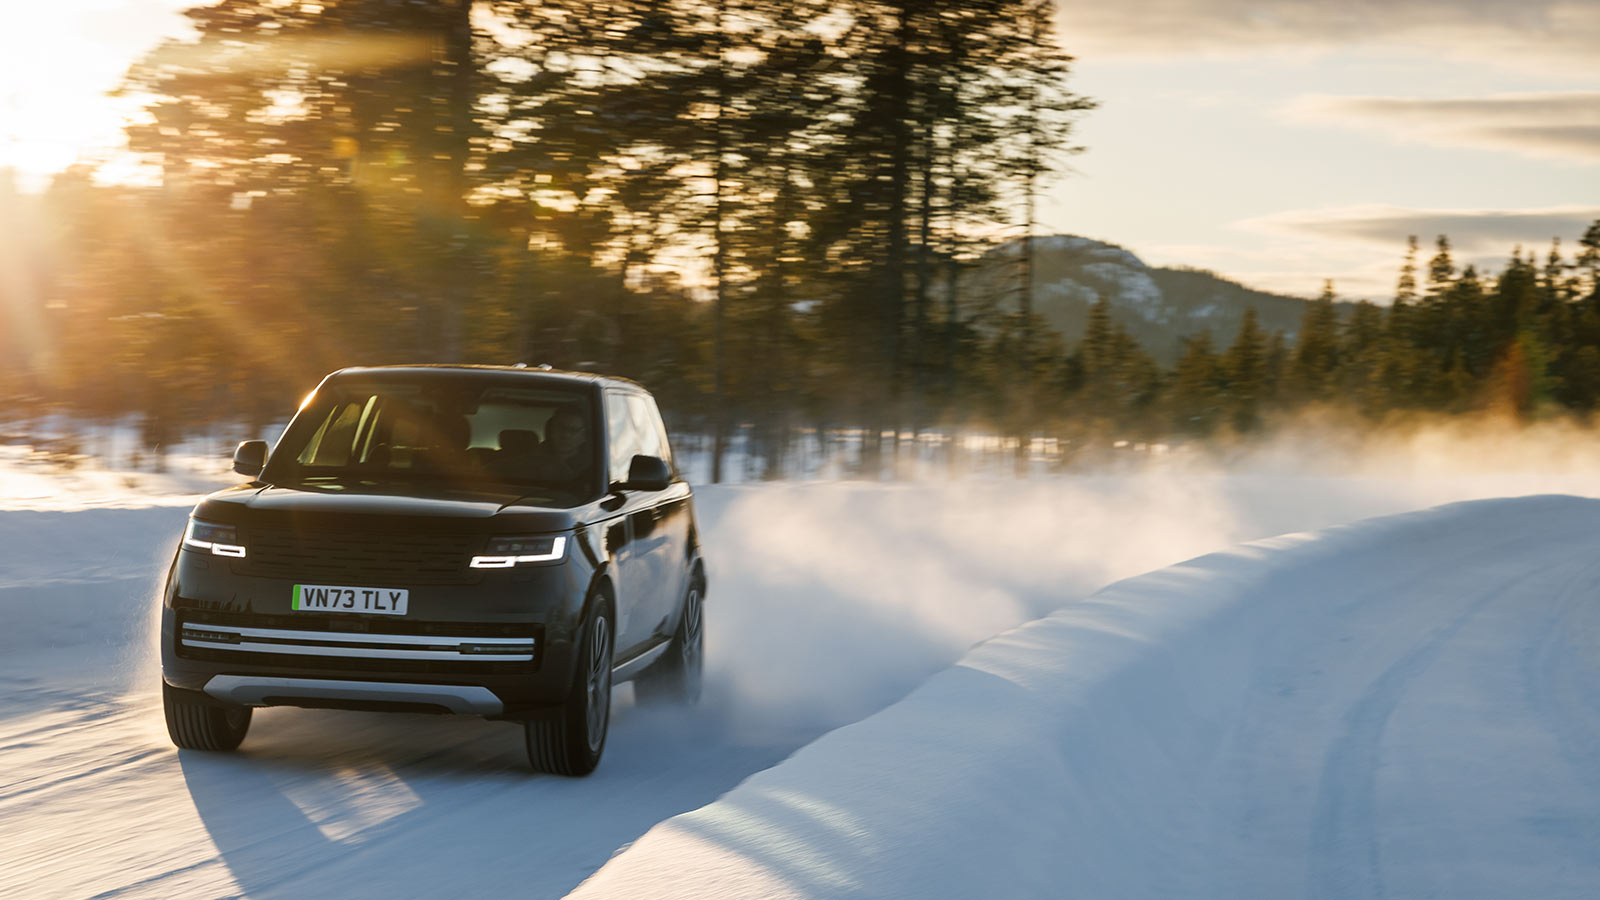 Range Rover's First All-Electric Vehicle Arrives This Year - IMBOLDN